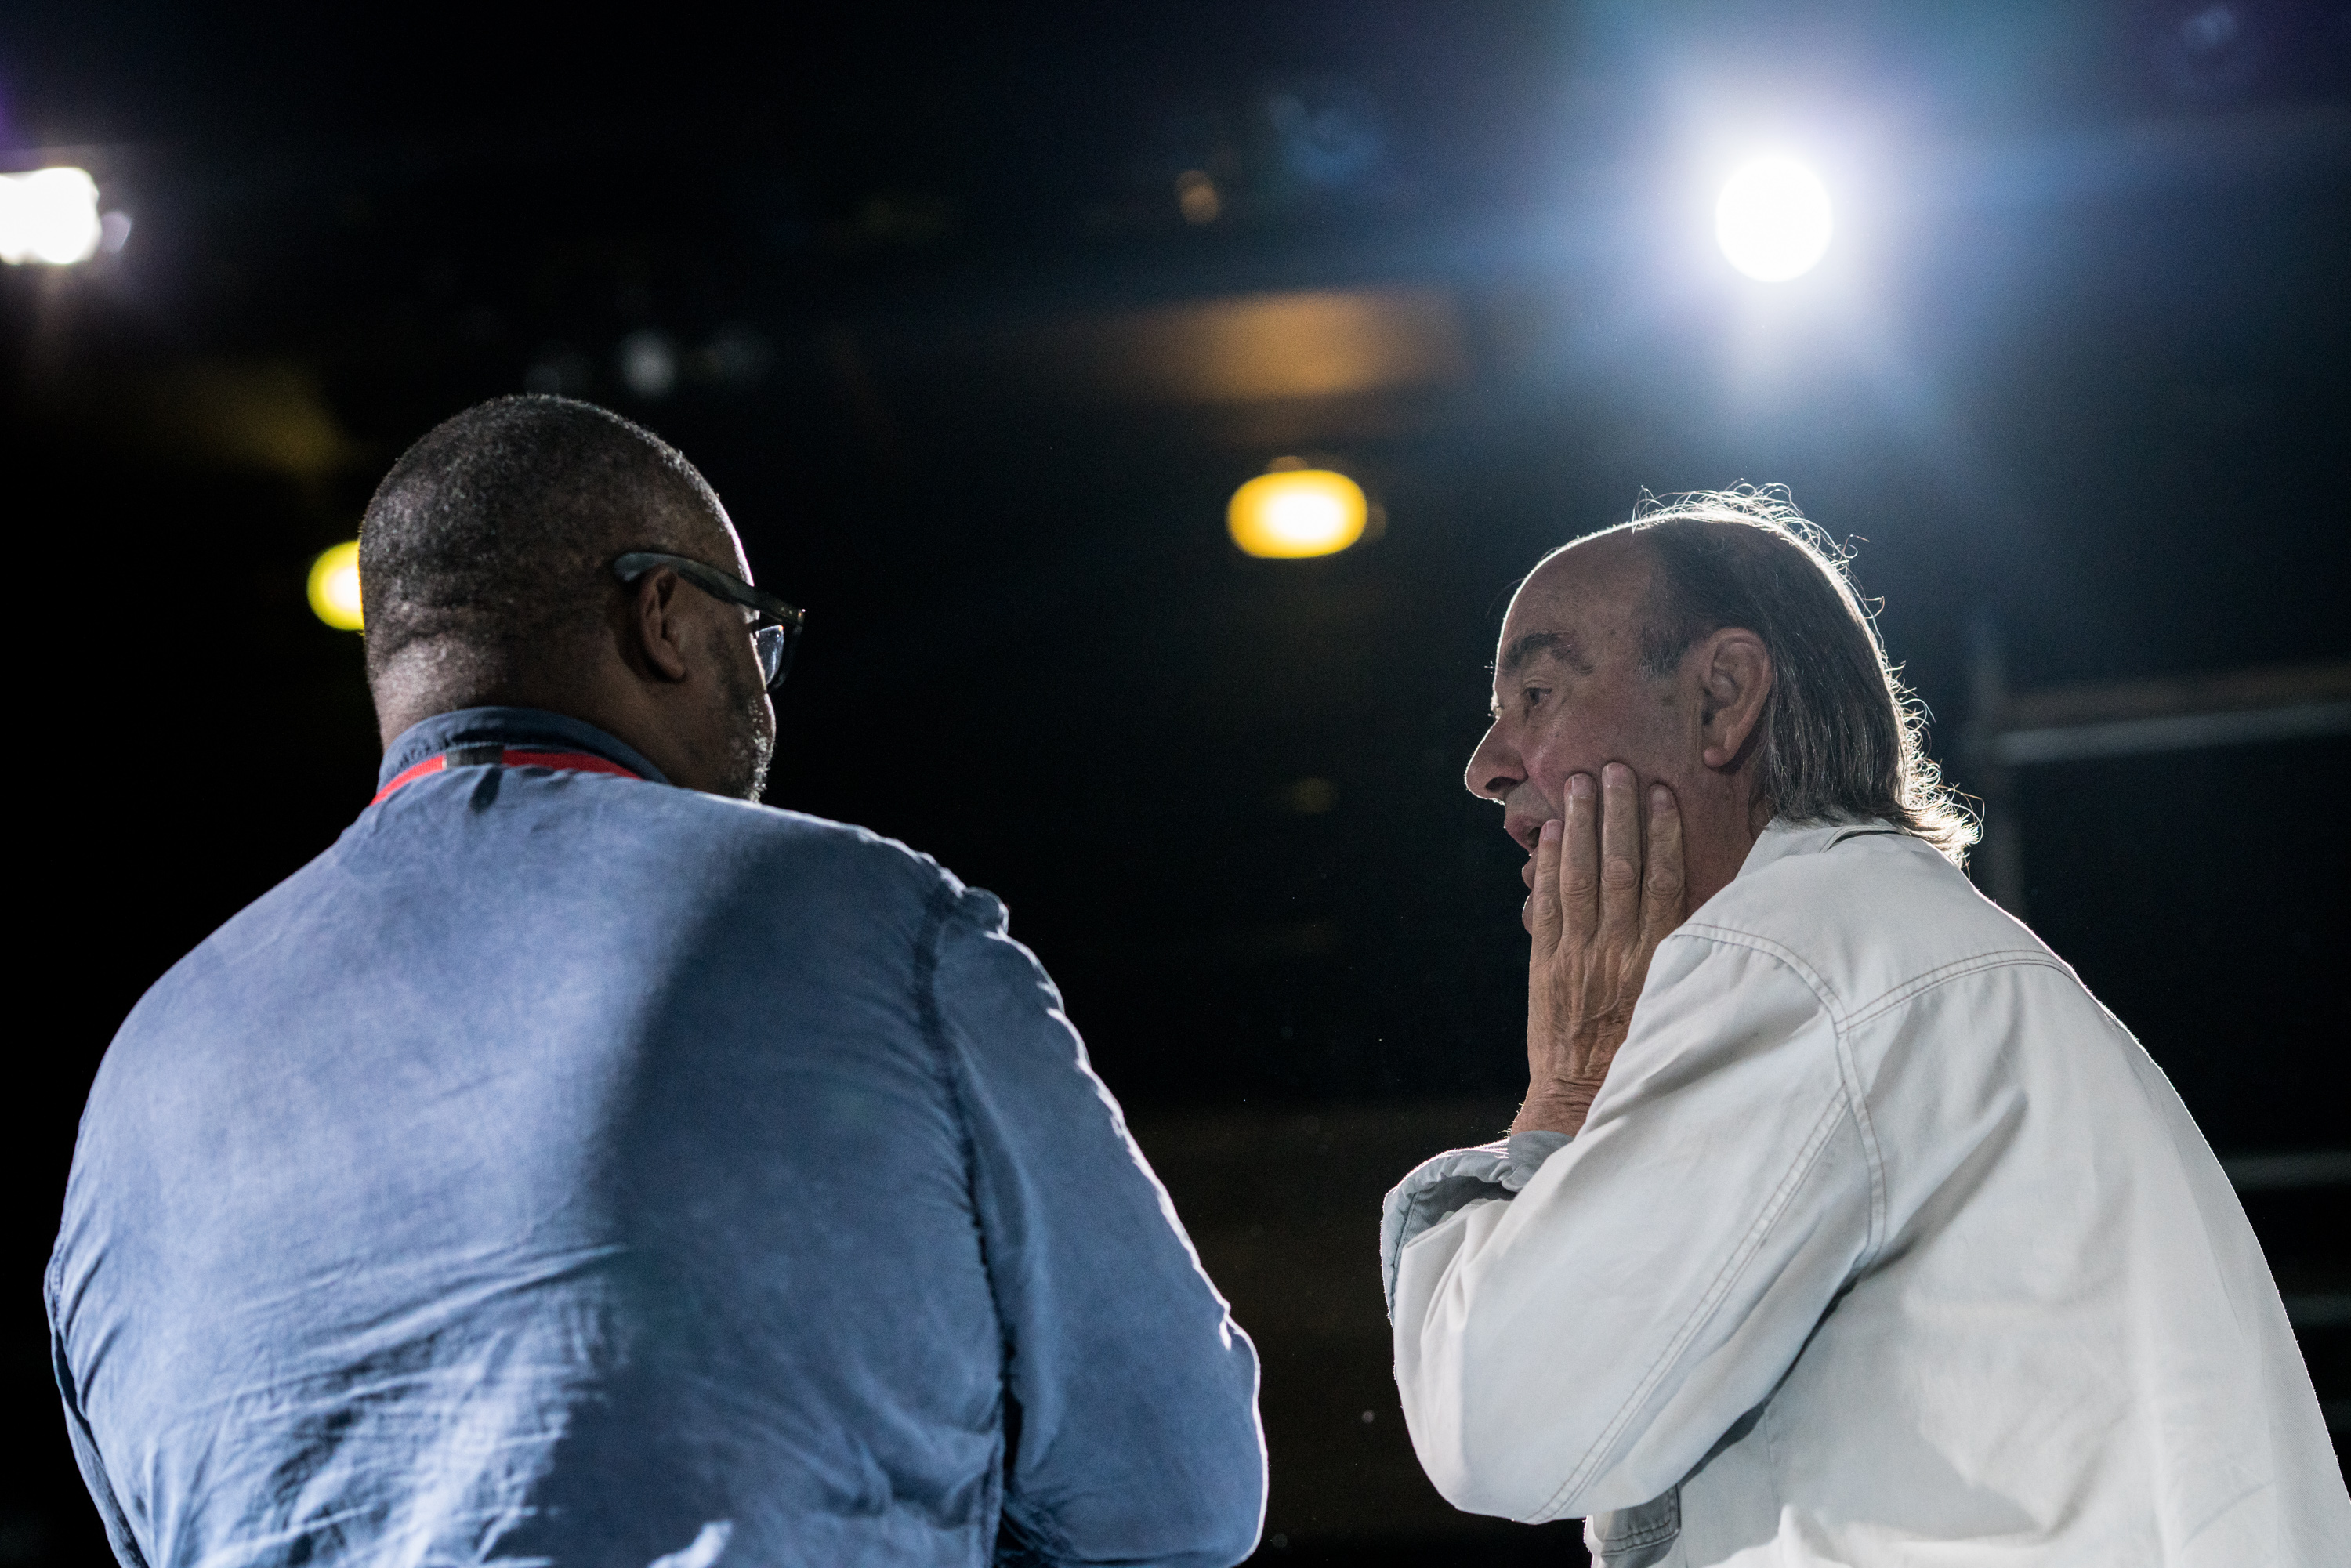 An actor from Life of Galileo is talking to an audience member, who listens with a look of rapt attention, his hand up to his mouth, his mouth open. The two men have their backs to us but their heads are turned inwards, towards each other, so that we can see their expressions. A stage light shines brightly in the background, out of focus.